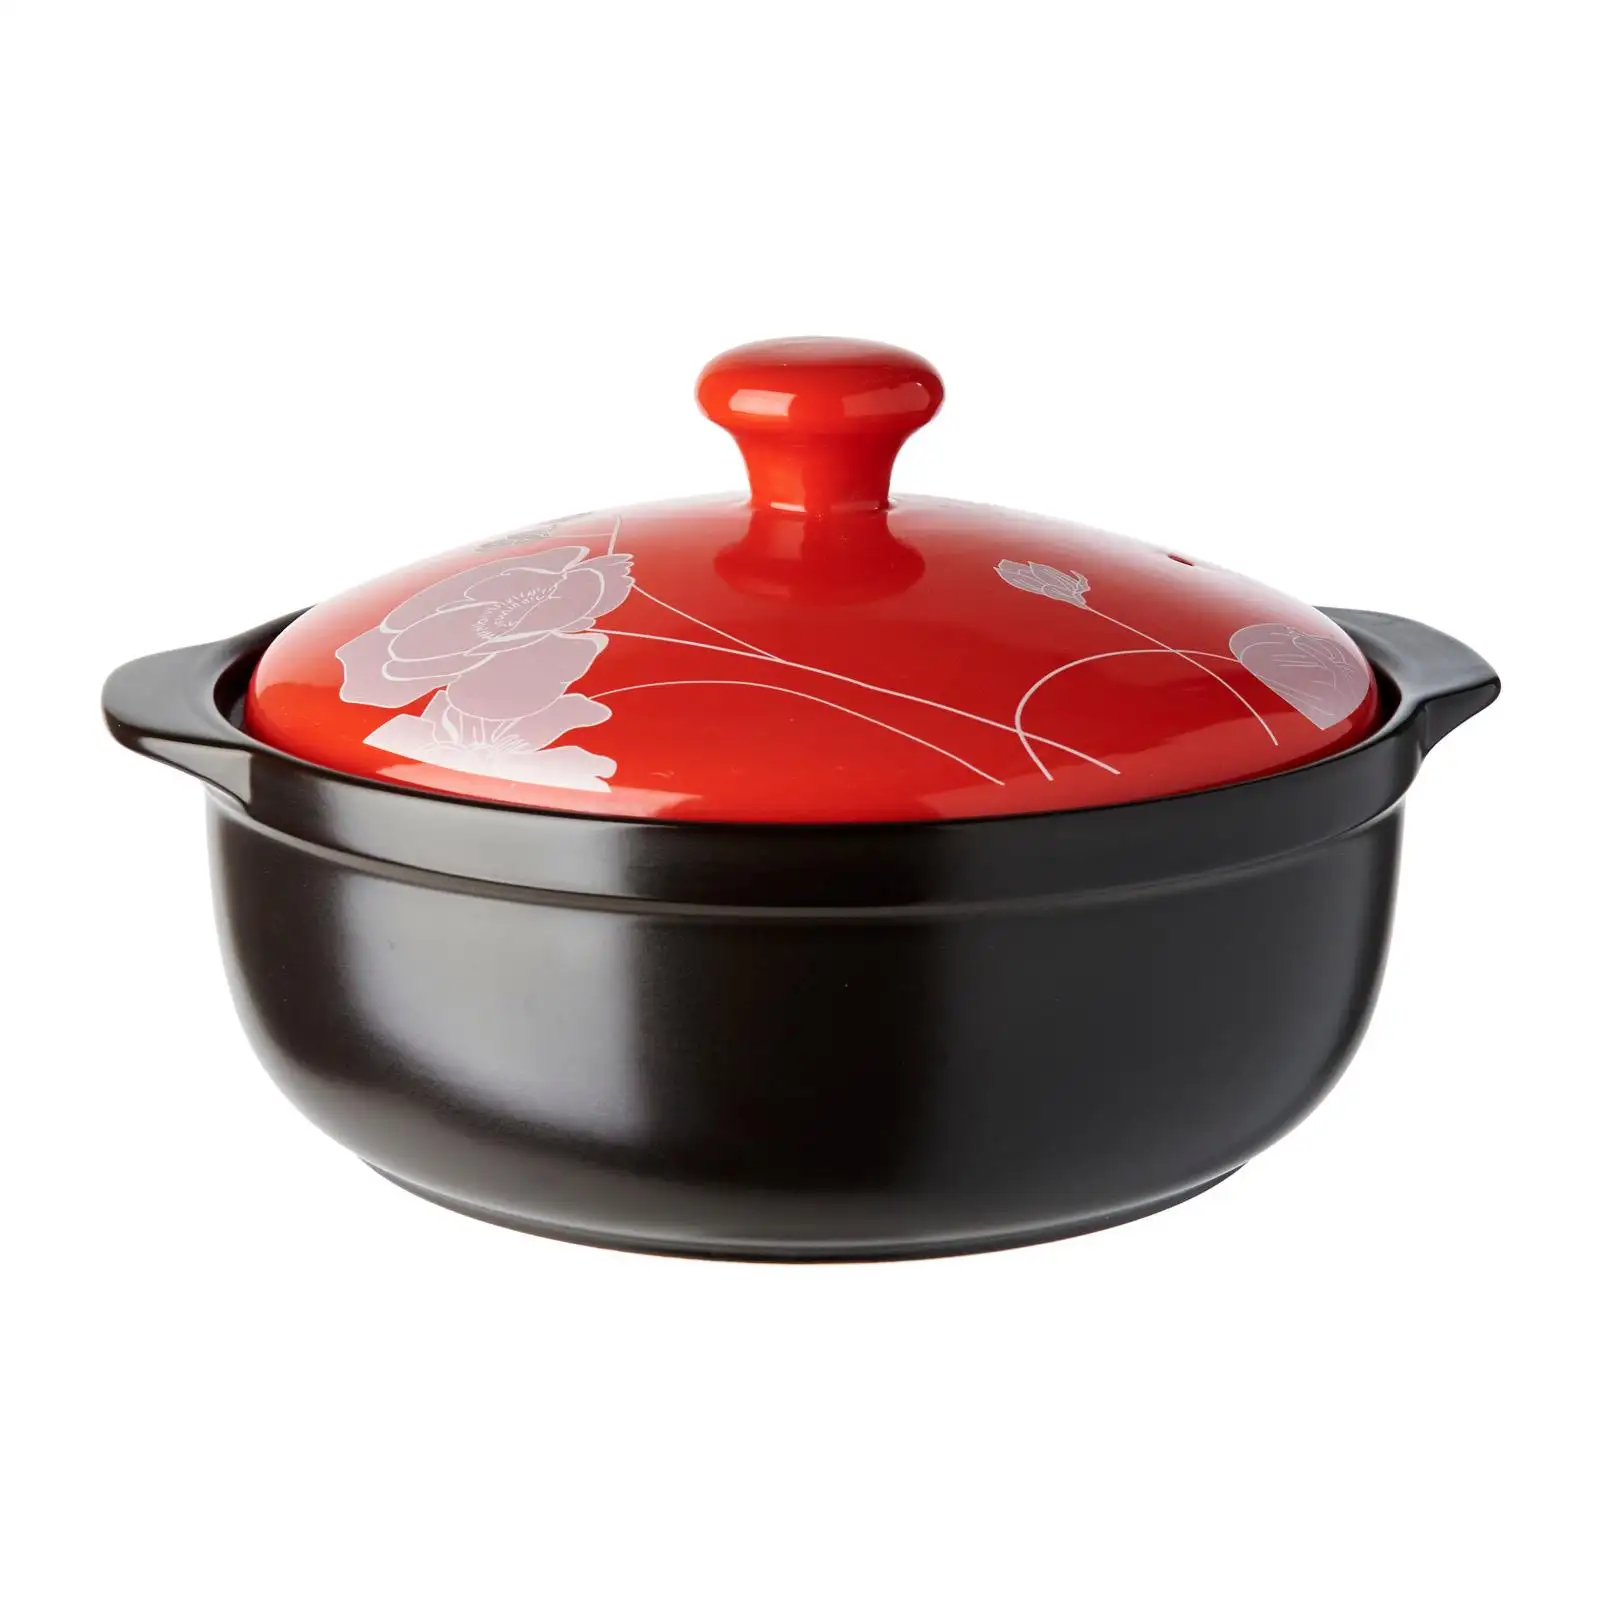 Low MOQ 2.5L Red/Black Color Cera Vita Silver Peony Casserole Ceramic Pot for Cooking with Lid Size D25 x H9cm